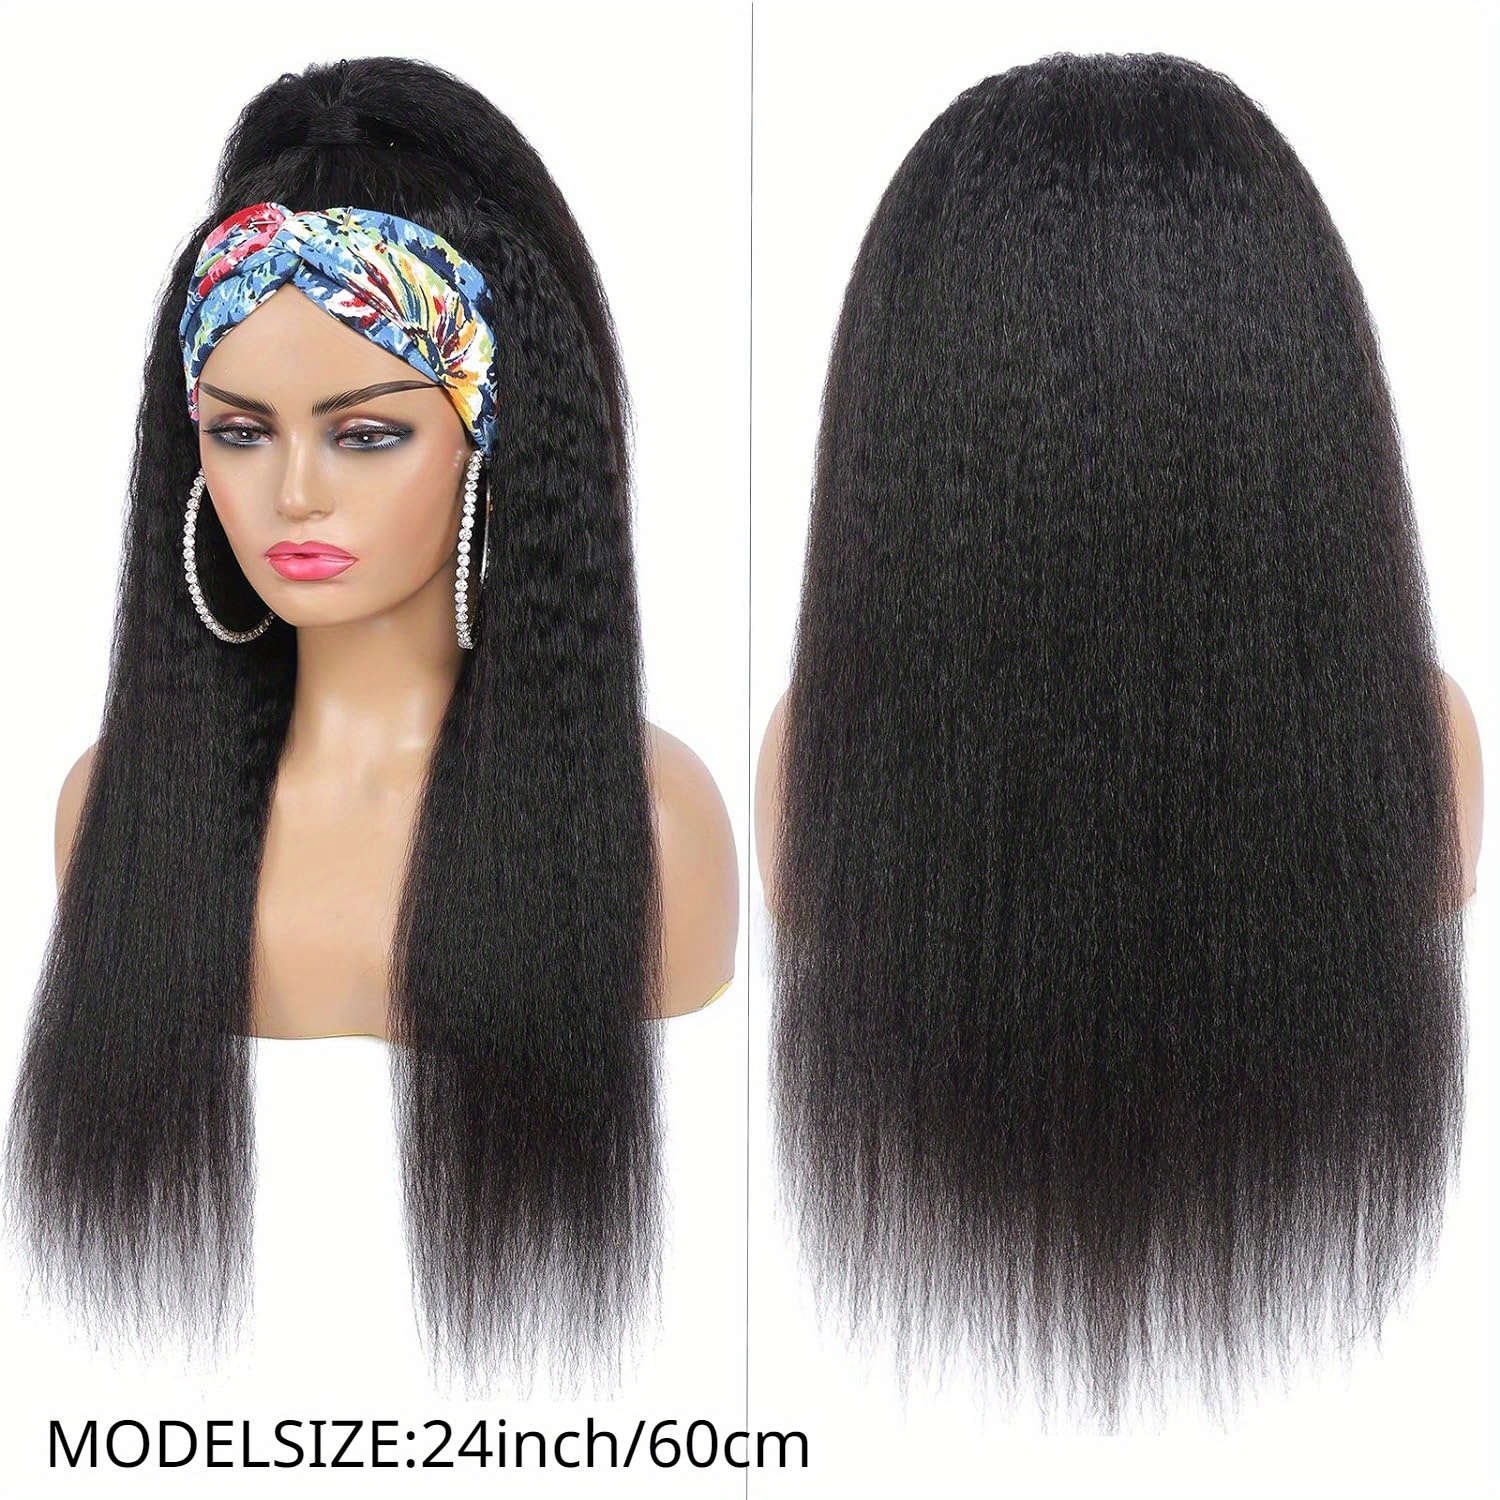 Headband Wig Human Hair Wigs for Women Easy Wear Non Lace Wig With